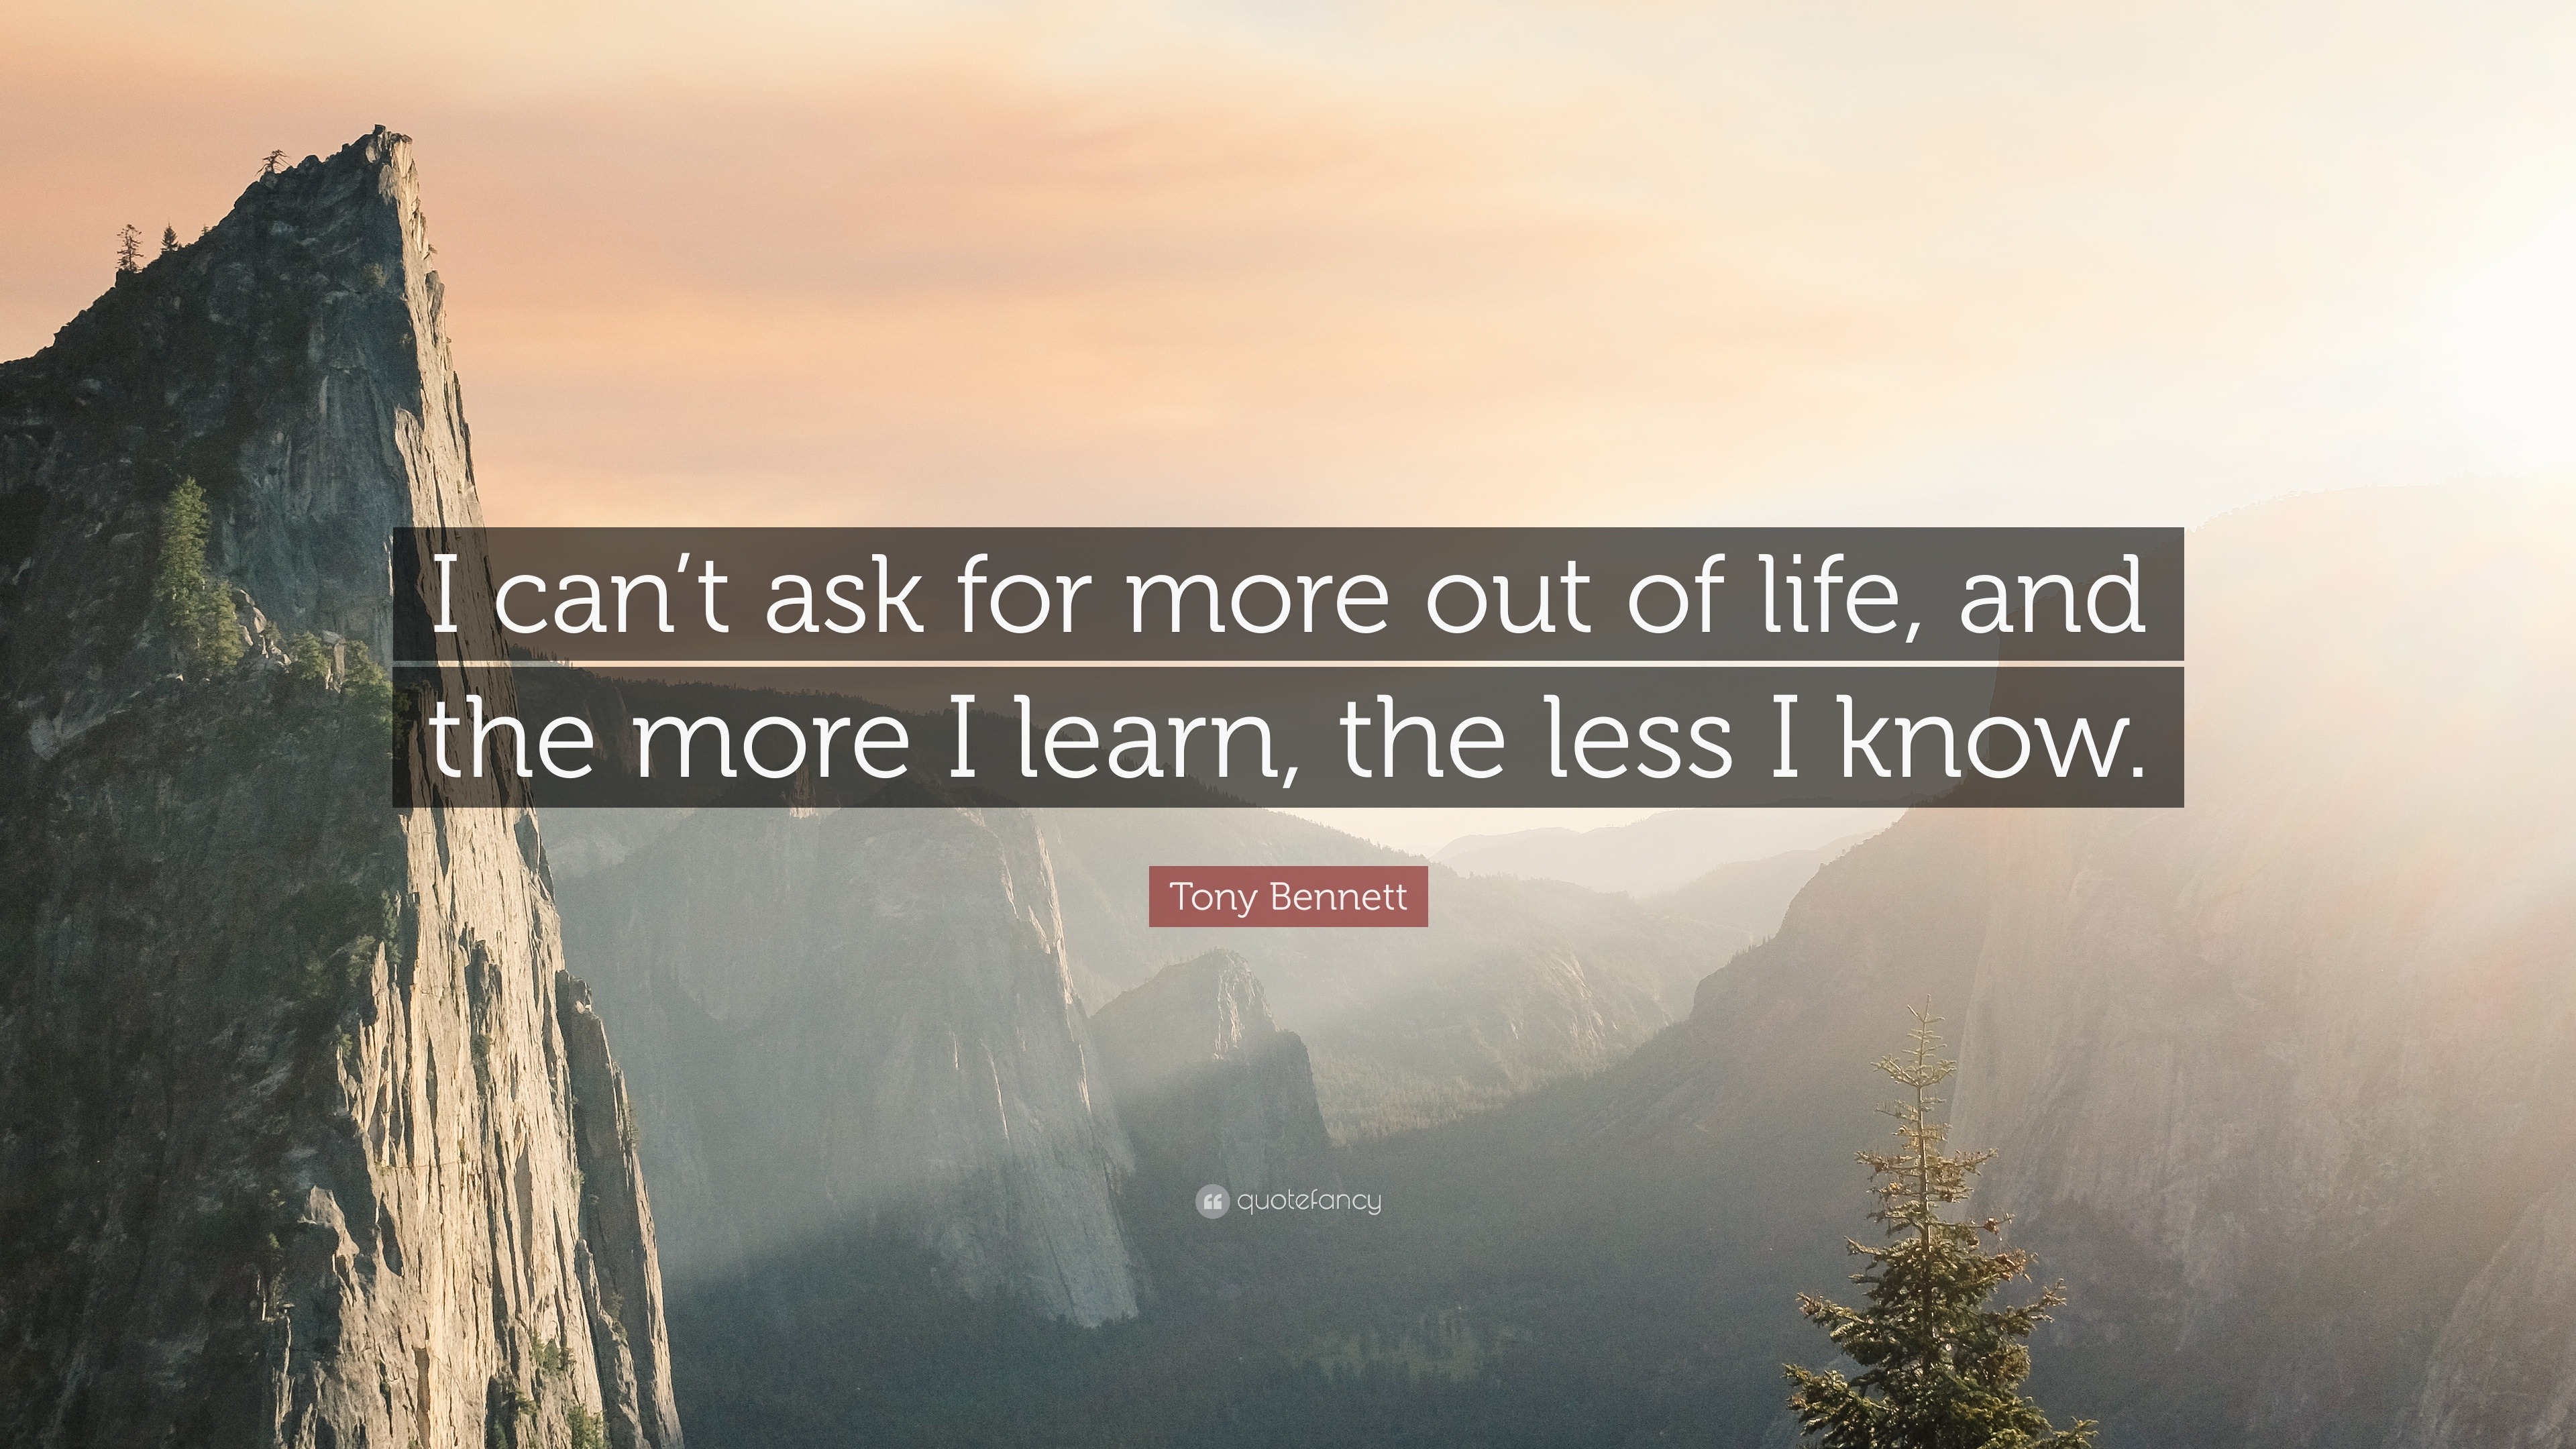 Tony Bennett Quote: “I can’t ask for more out of life, and the more I ...